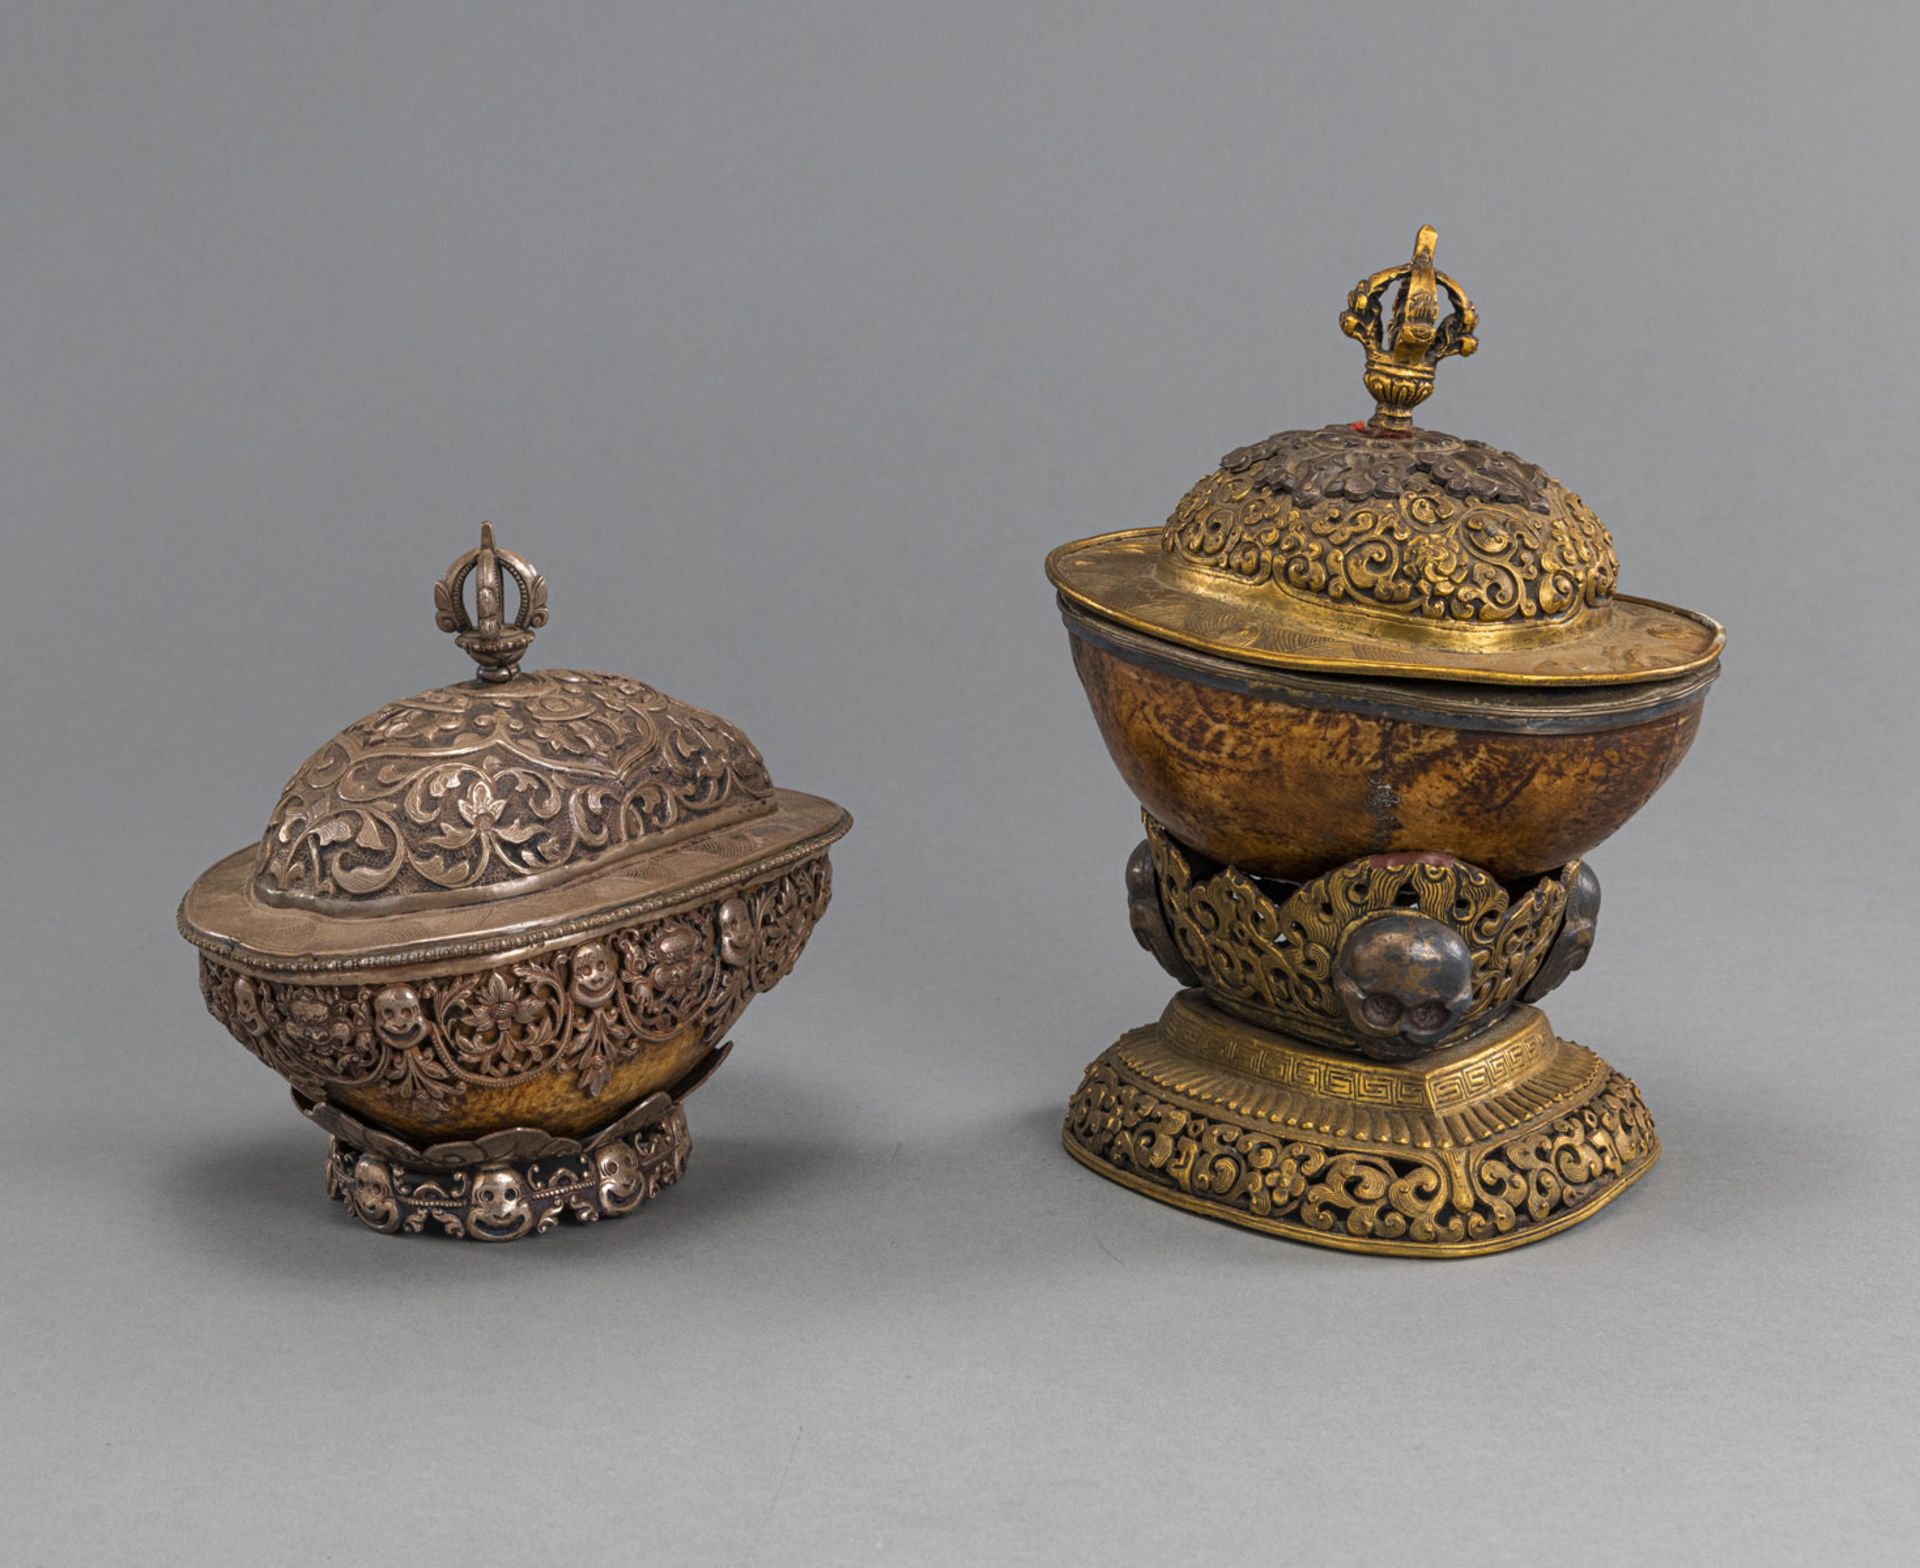 TWO MOUNTED KAPALA, PARTLY WORKED IN SILVER OR GILT-COPPER ON STANDS - Image 2 of 4